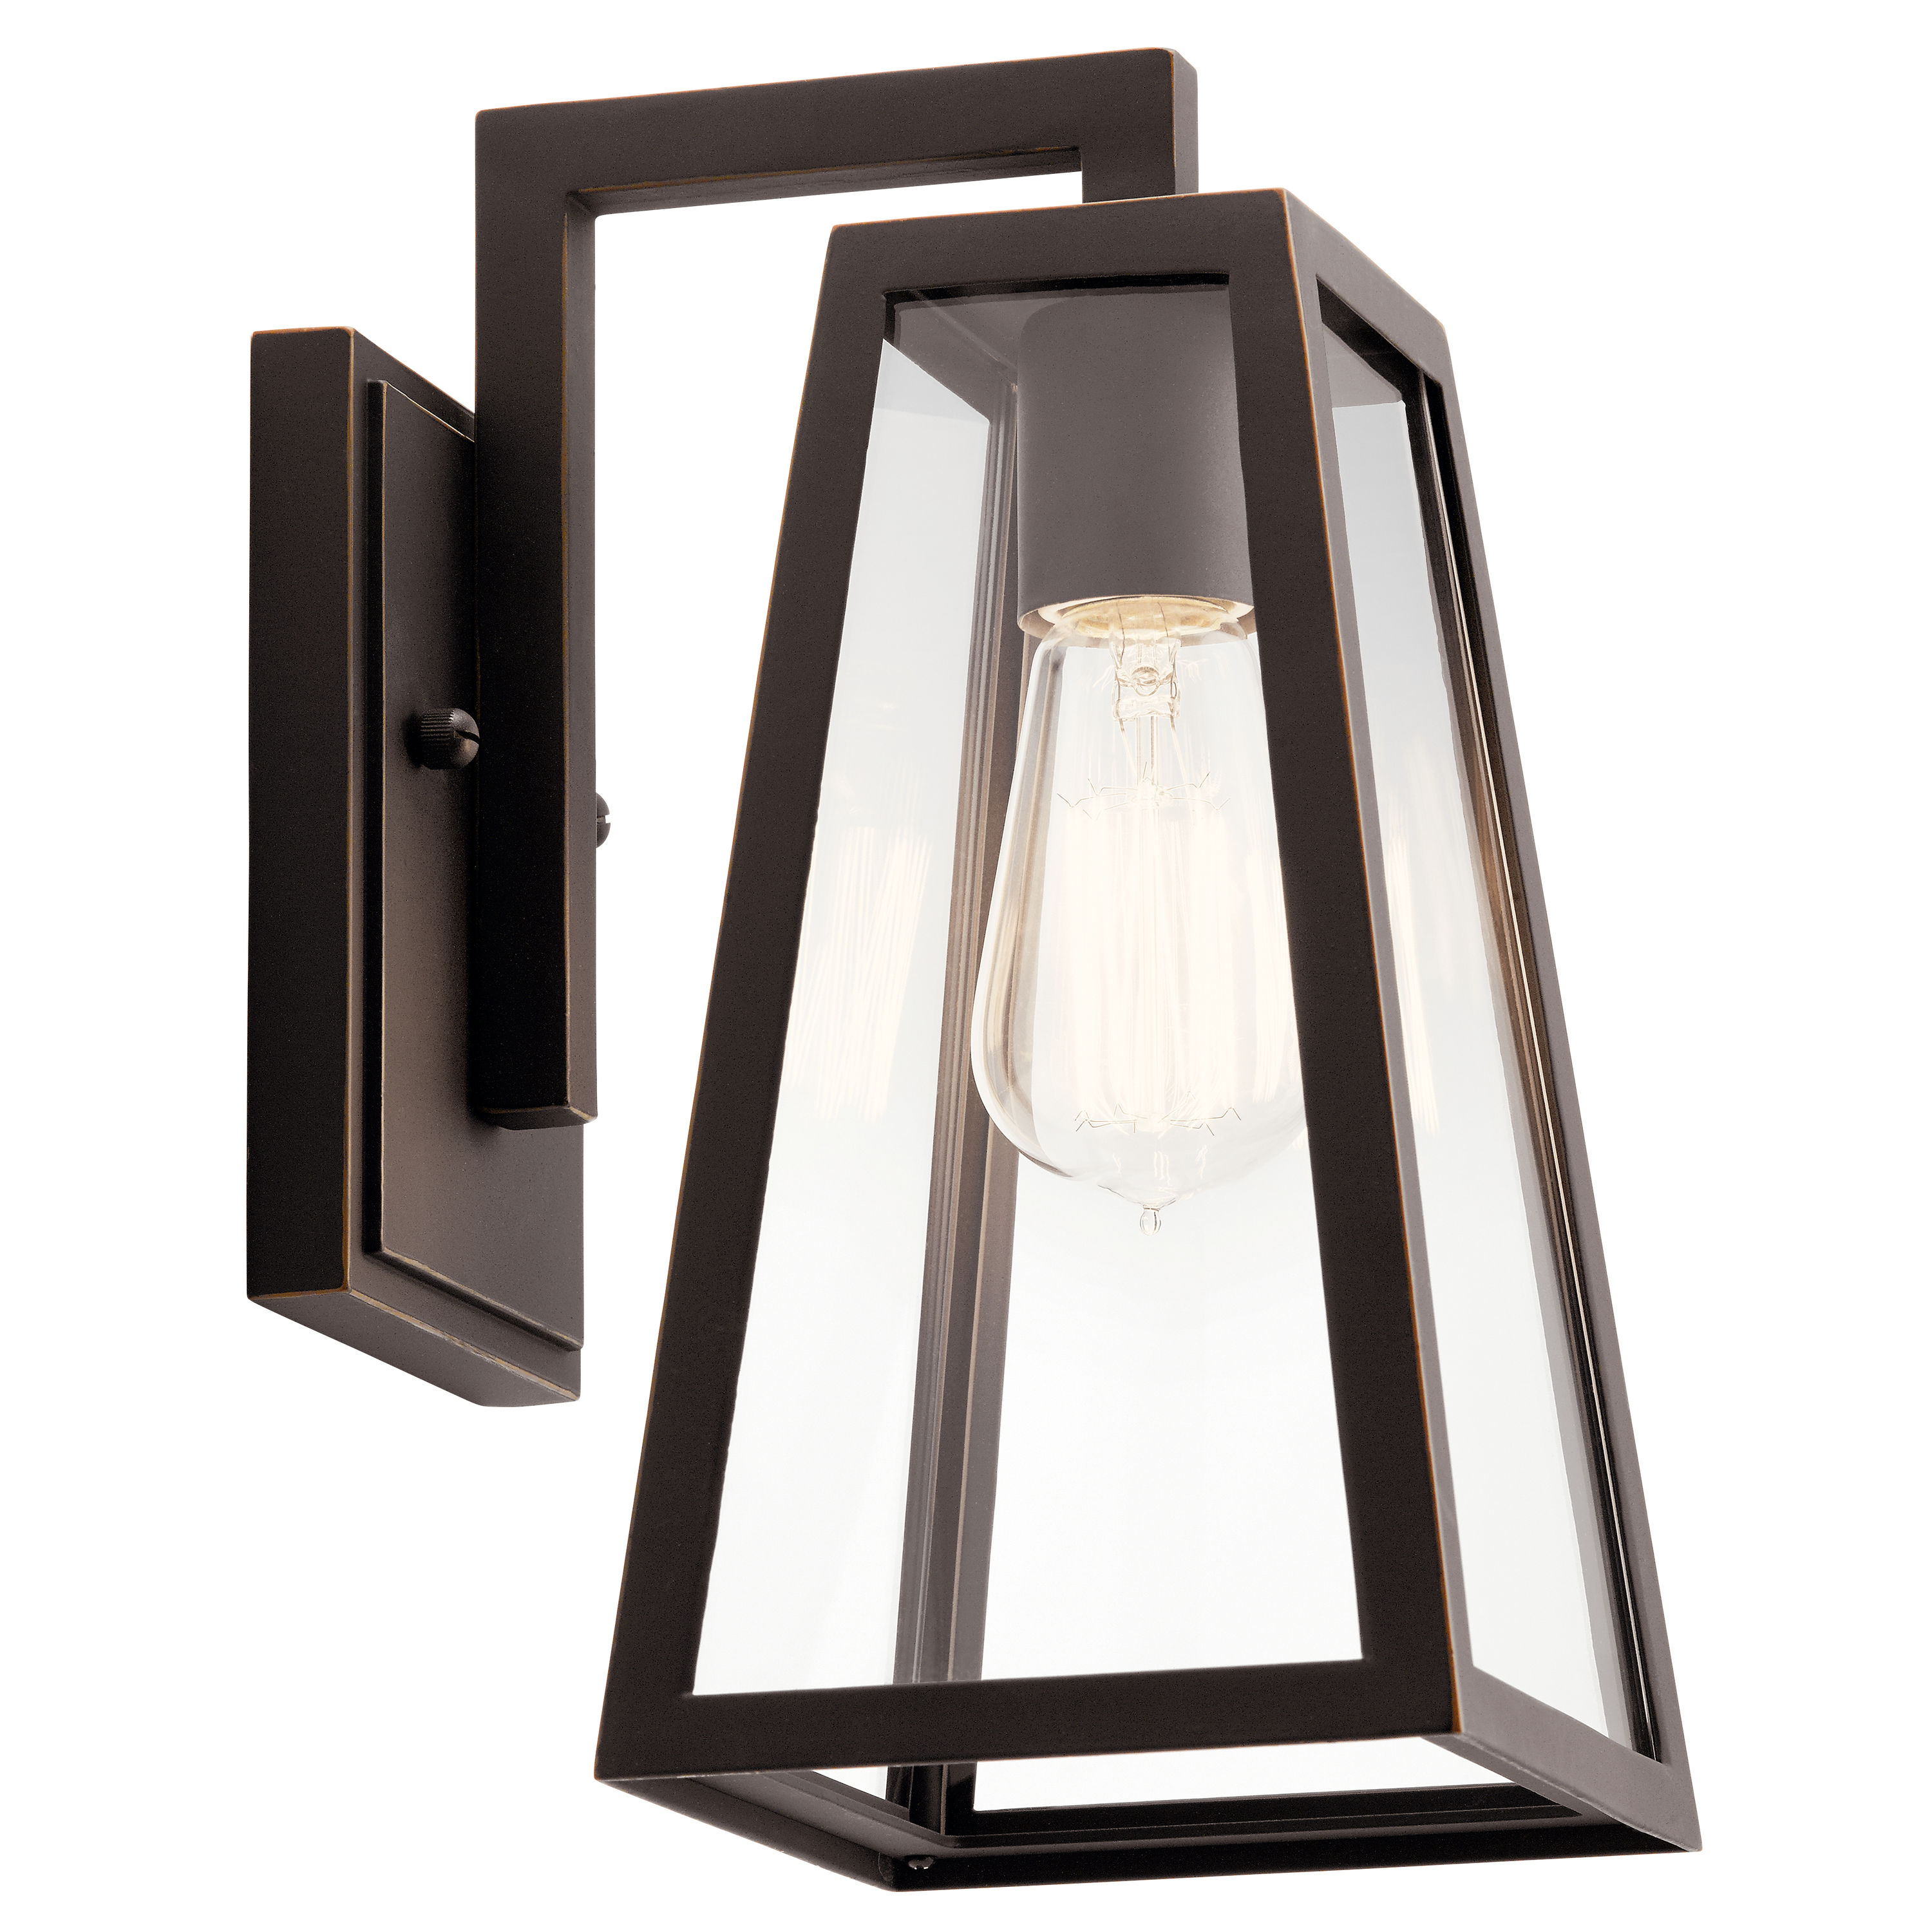 Kichler Delison 1-Light 11.5-in Rubbed Bronze Outdoor Wall Light